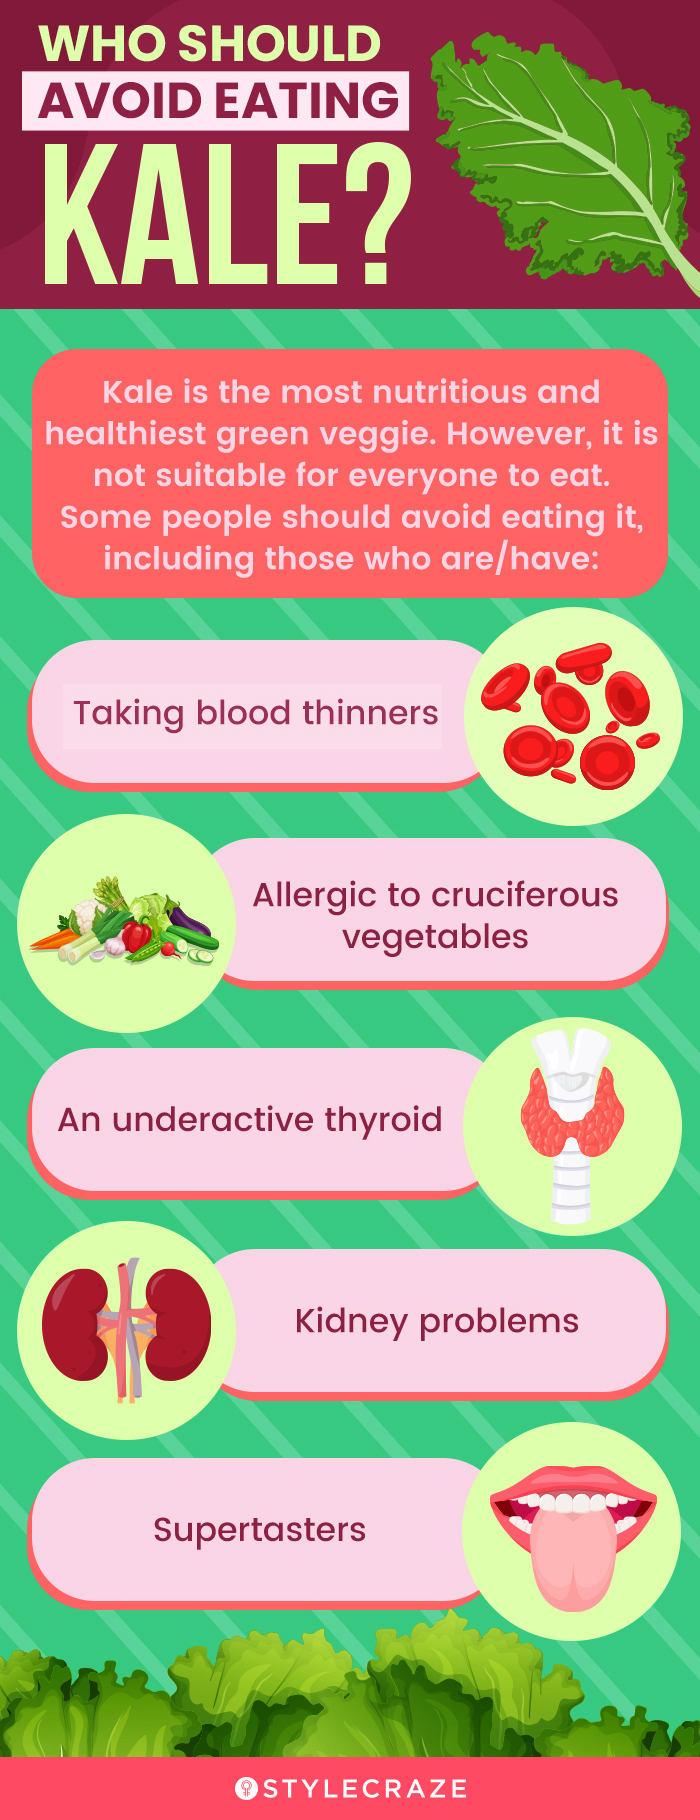 who should avoid eating kale [infographic]